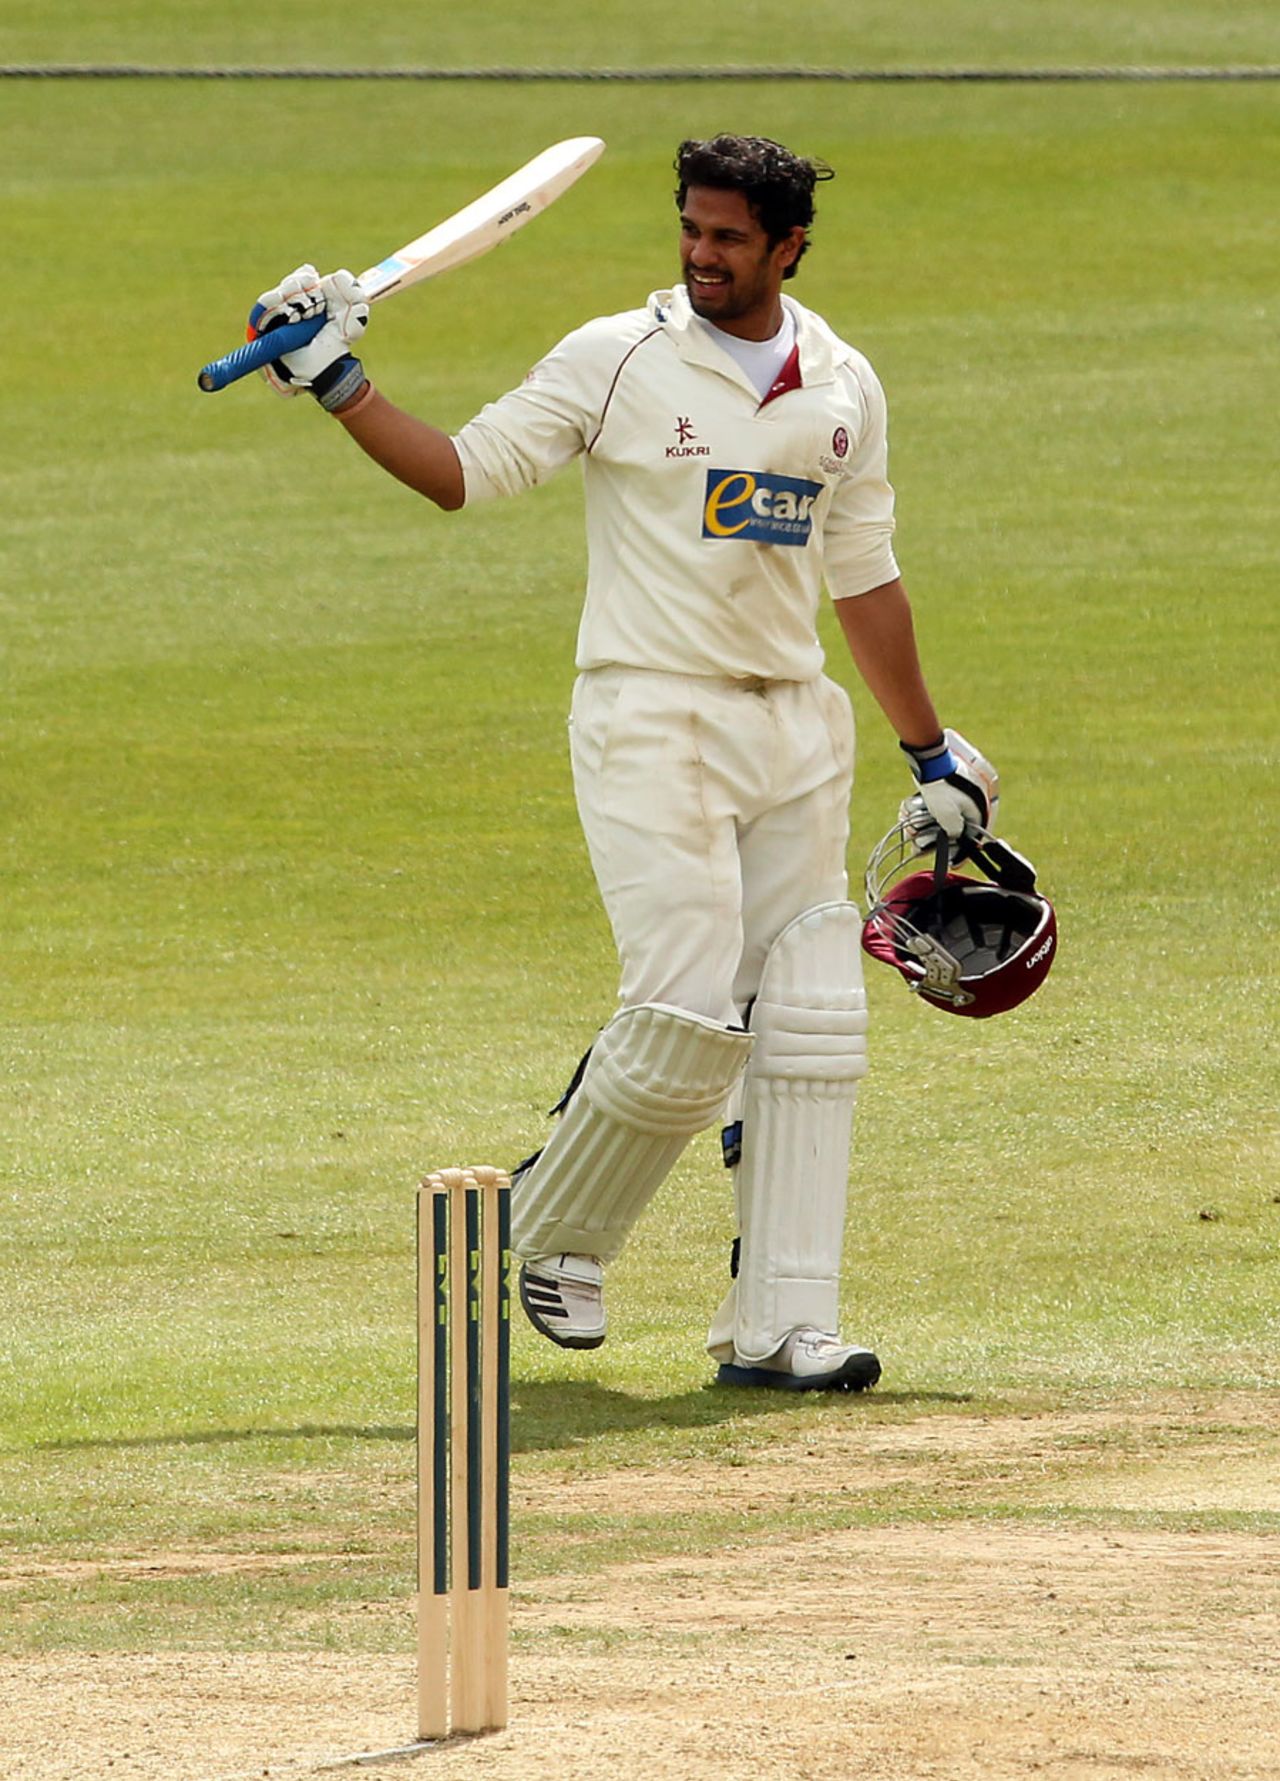 Arul Suppiah celebrates reaching his century, Surrey v Somerset, County Championship, Division One, 1st day, The Oval, May 16, 2012